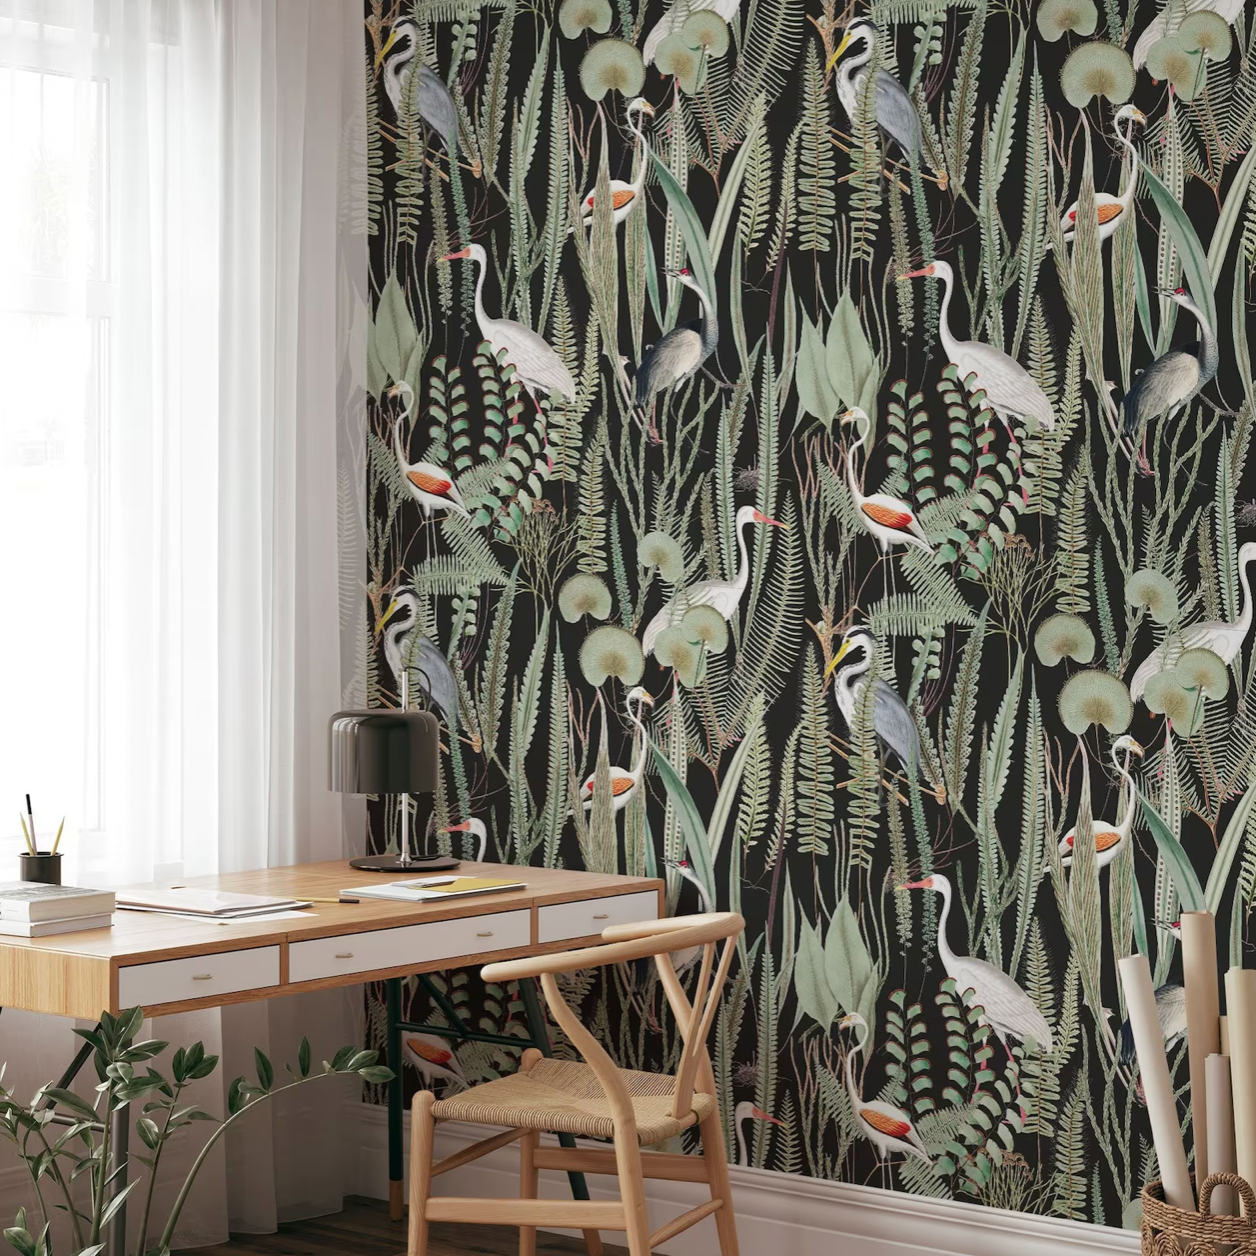 Transform your home office into a stimulating workspace with our striking black background heron and botanical wallpaper. The sophisticated black backdrop complements the sleek wooden desk and chair, creating a harmonious blend of professionalism and comfort. The intricate floral patterns and majestic herons add a touch of visual intrigue and inspiration, transforming your home office into a haven of productivity and creativity.